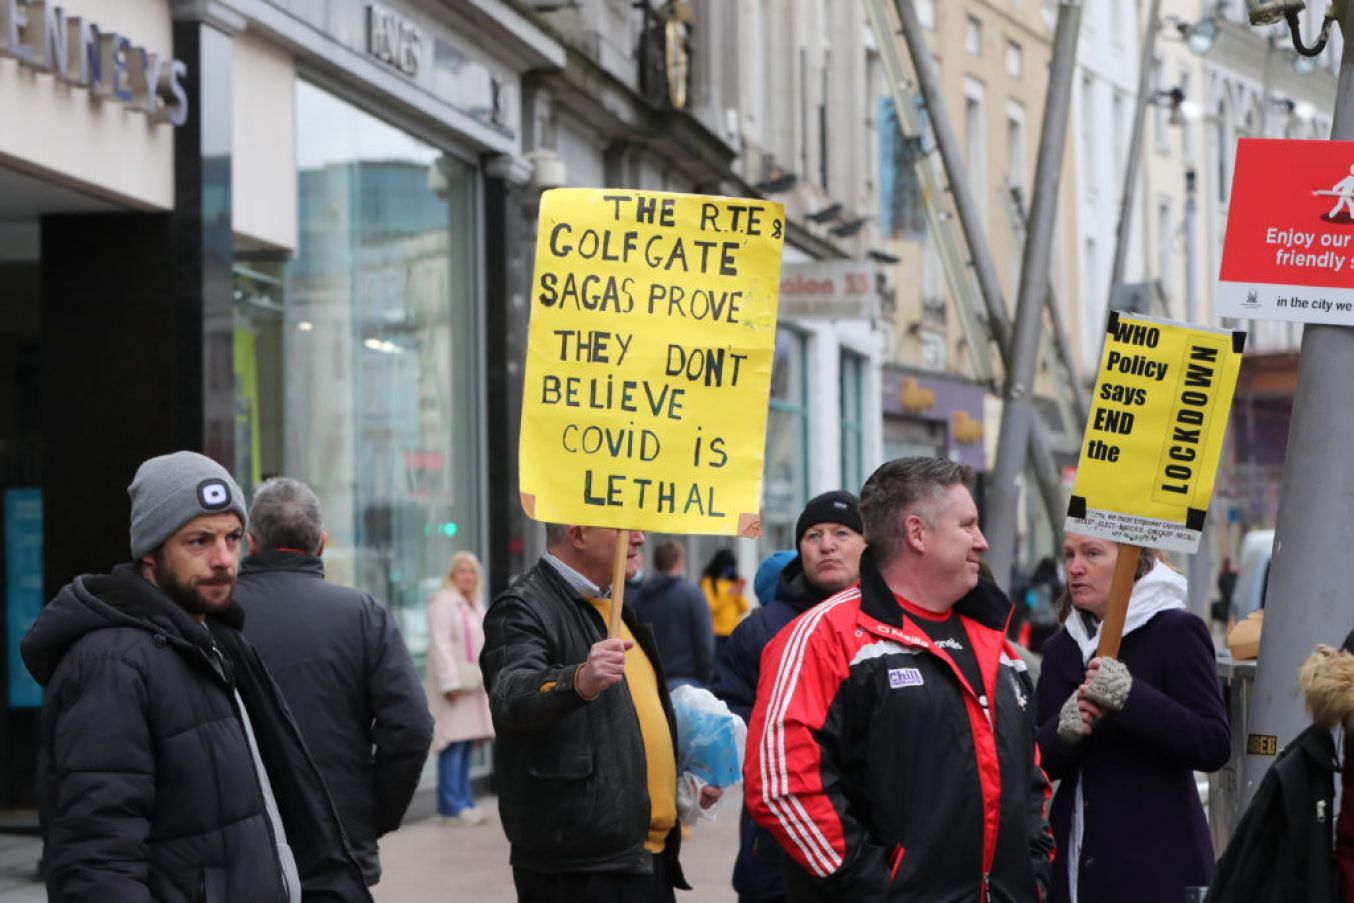 Crowds Have Gathered In Cork City Centre Amid A Large Garda Presence. Photo: Pa Images.